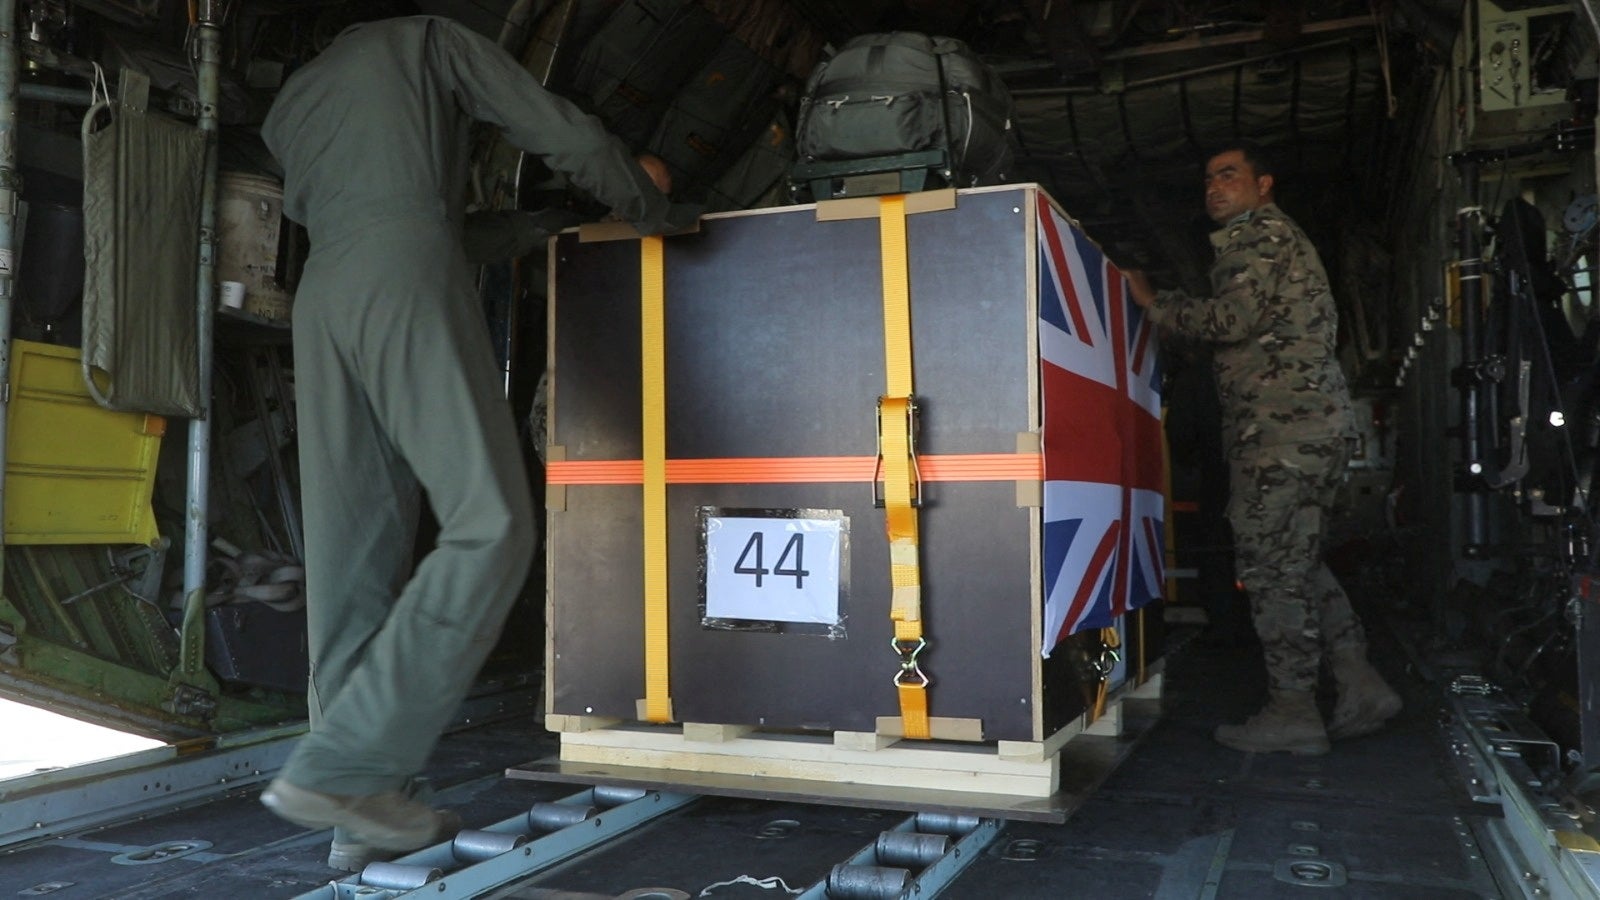 The British aid packages were dropped at Tal Al-Hawa hospital in north Gaza by Jordanian Air Force aircraft